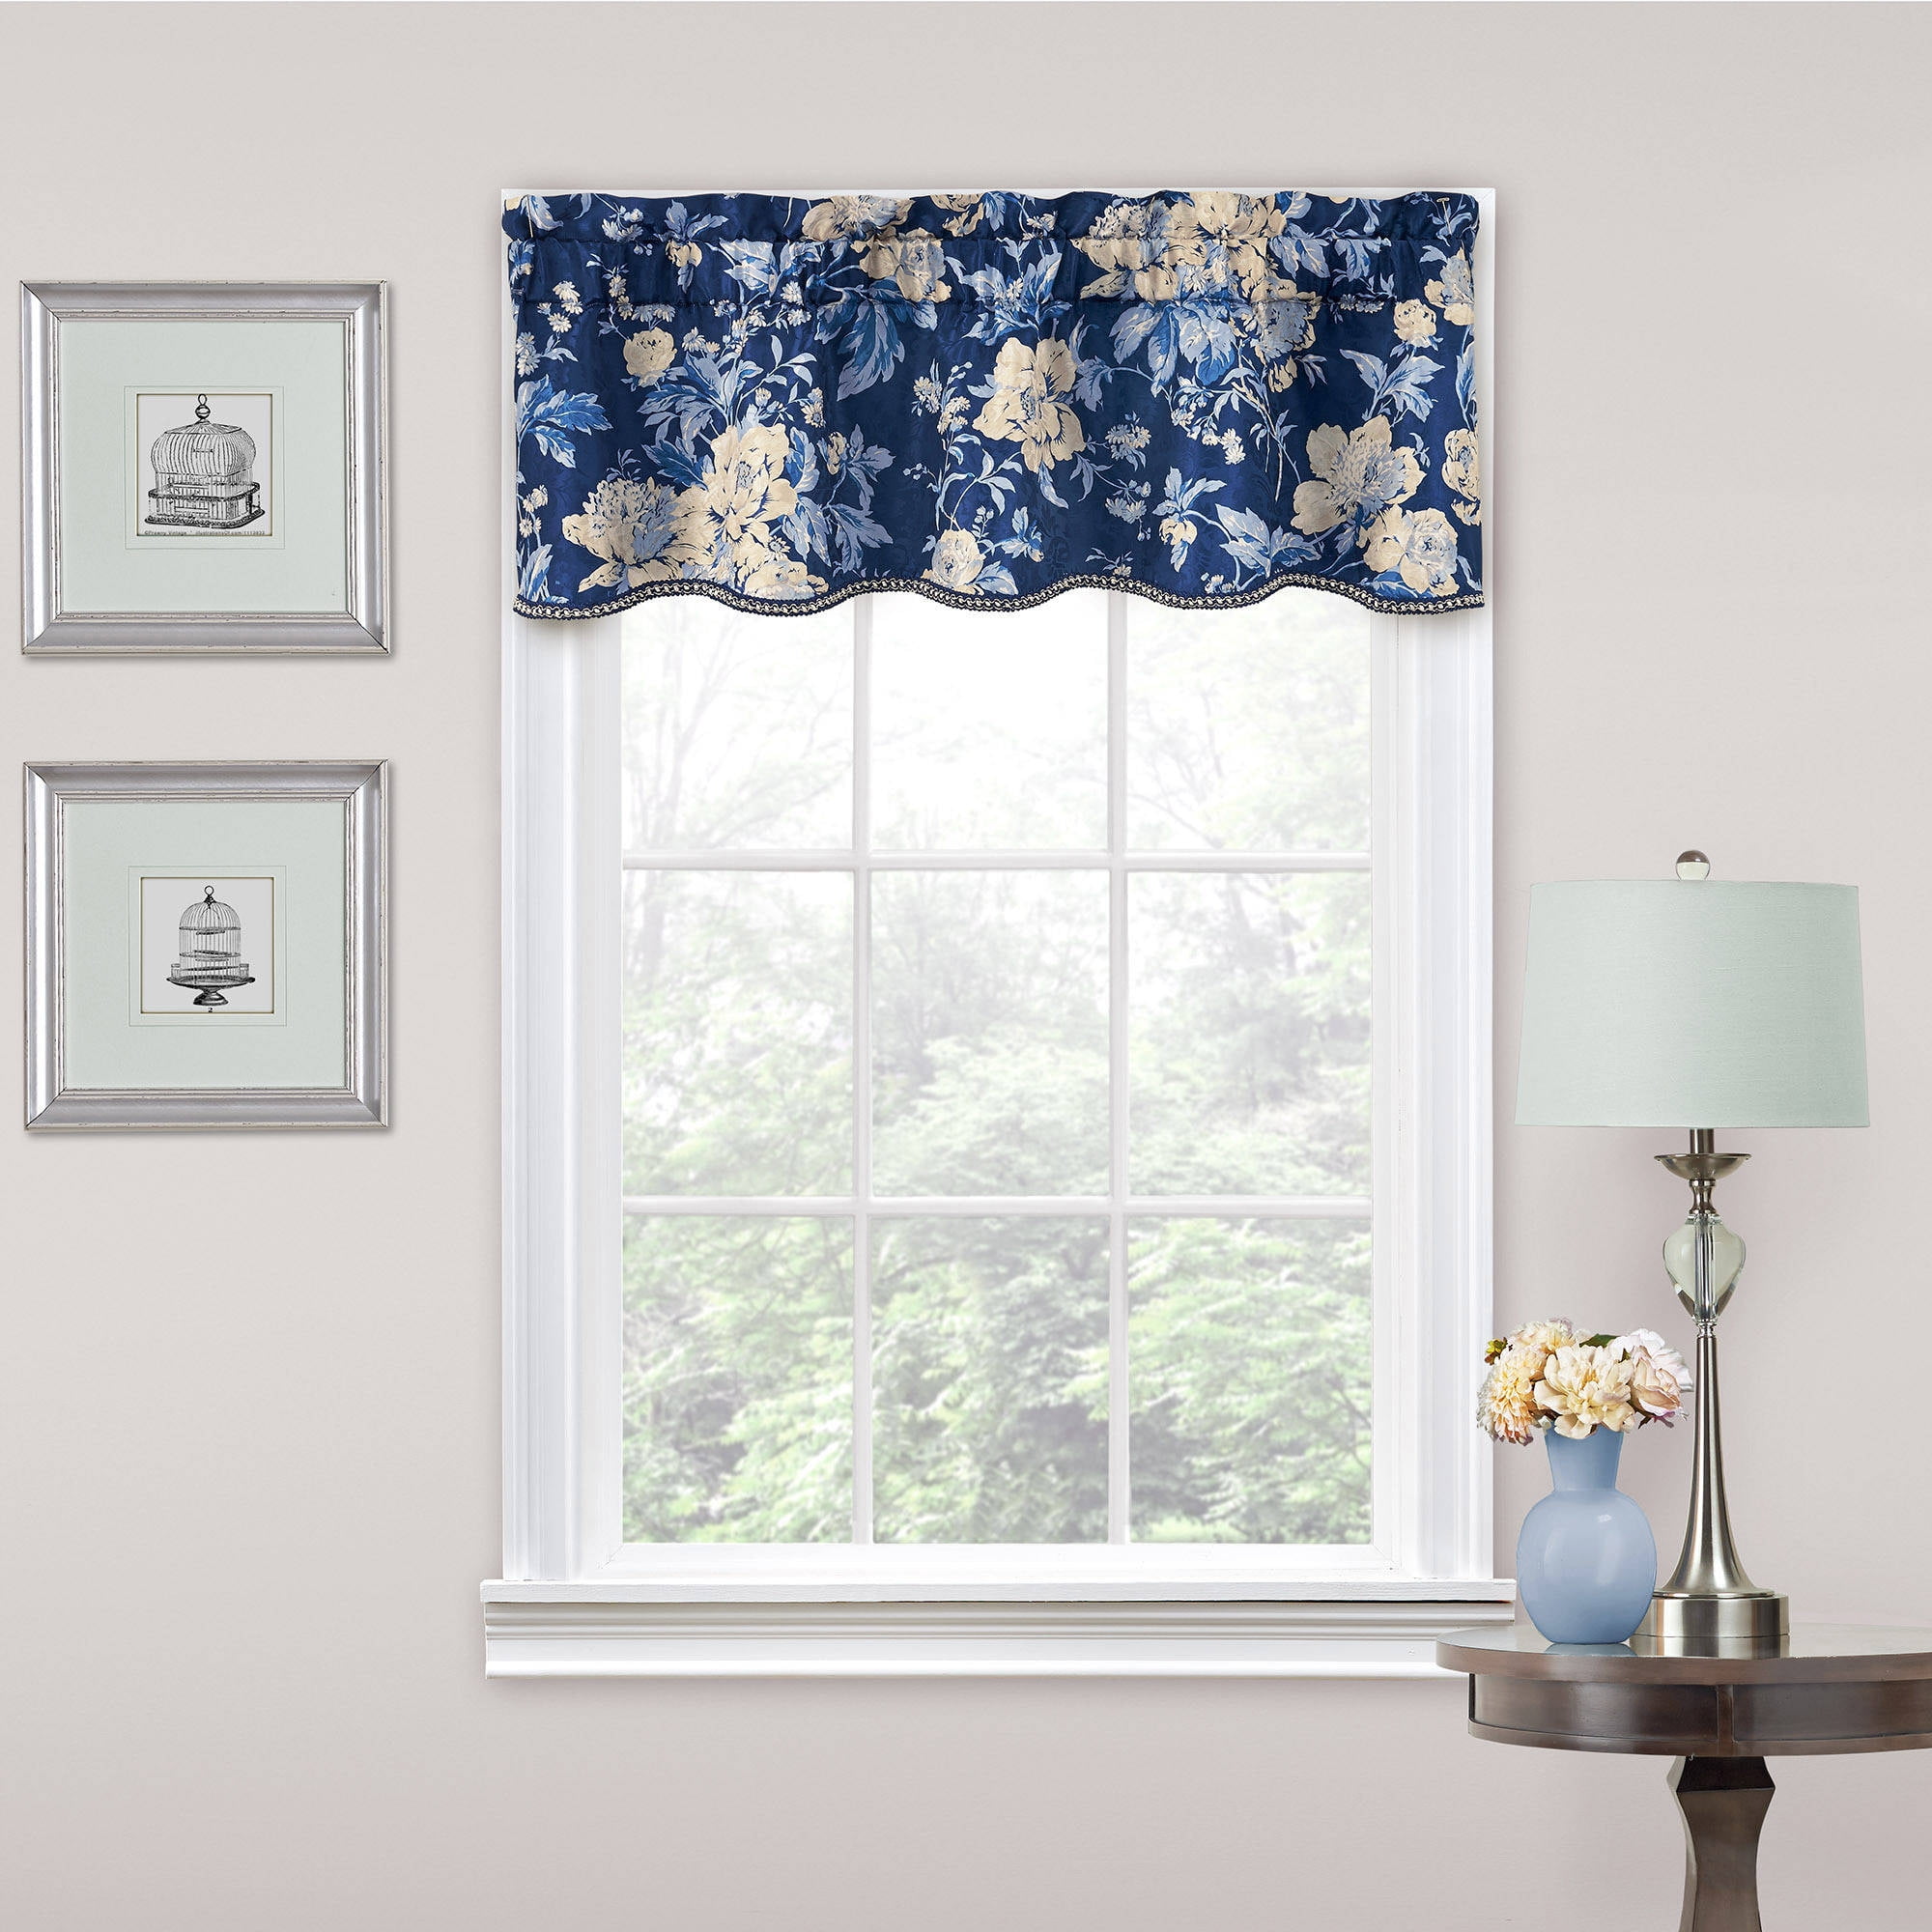 Details about   WAVERLY HOME FASHIONS Self-Lined Floral Window Valance 78" W X 16" L 